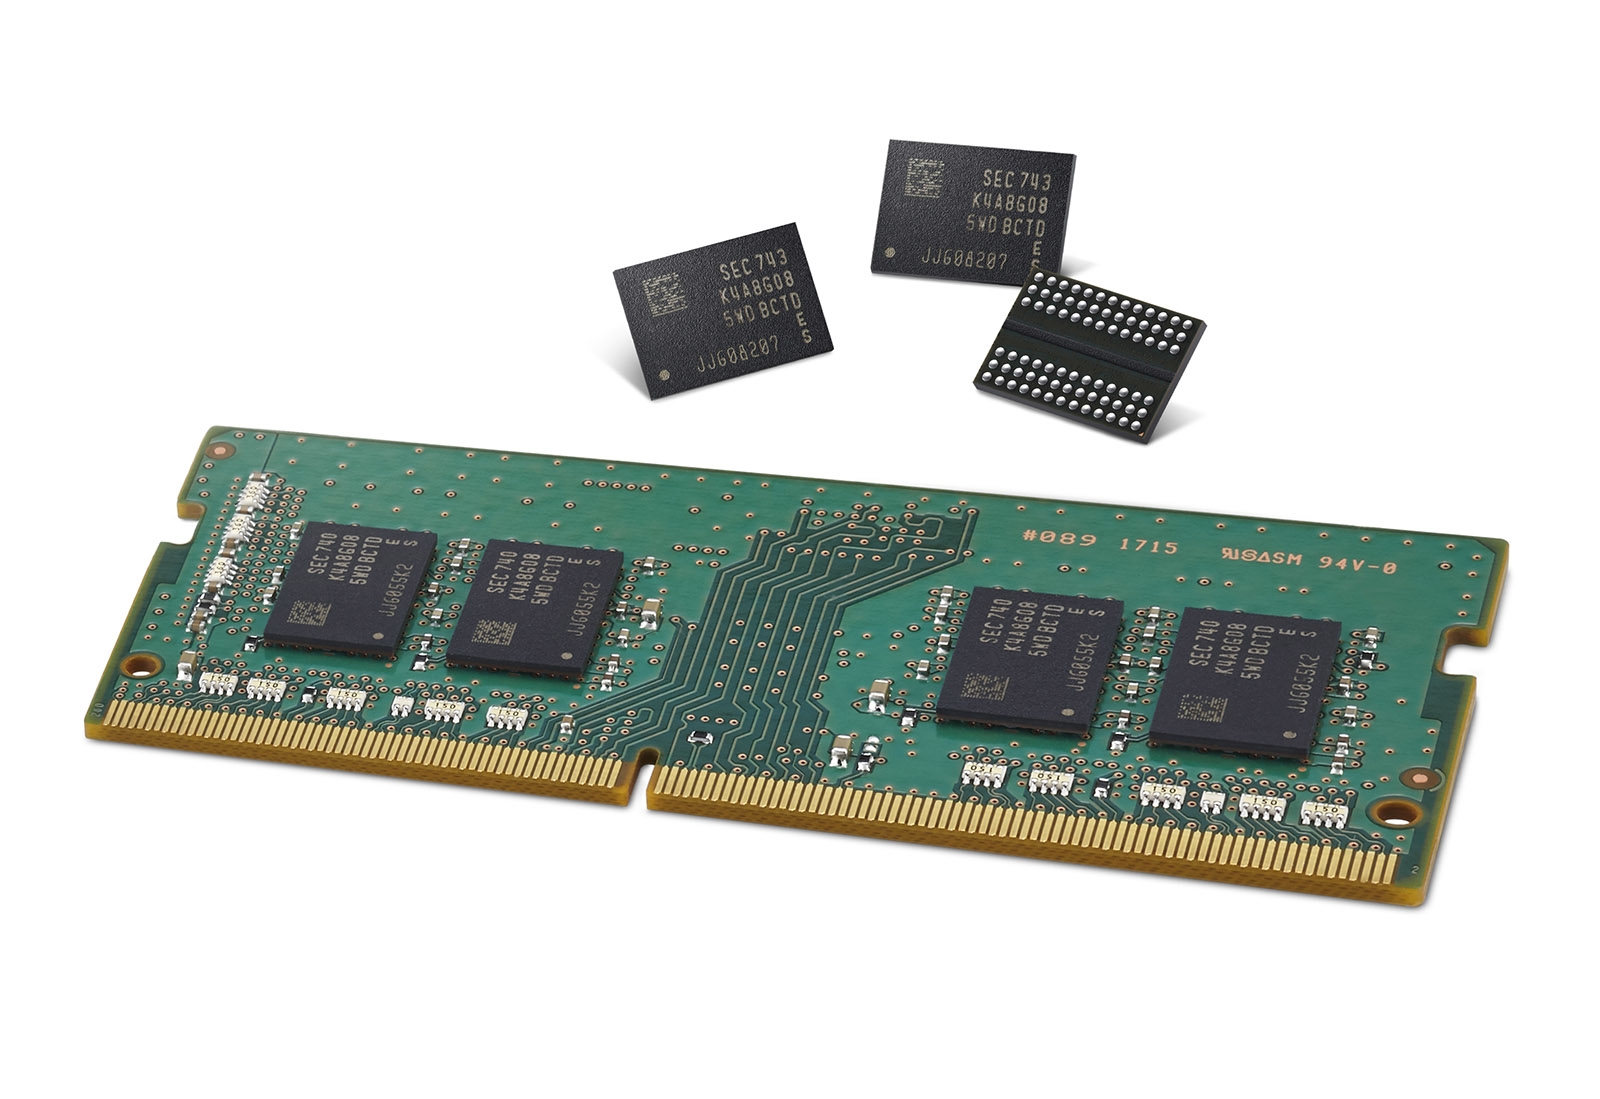 Samsung's faster, smaller DRAM chips are coming to your next PC | DeviceDaily.com